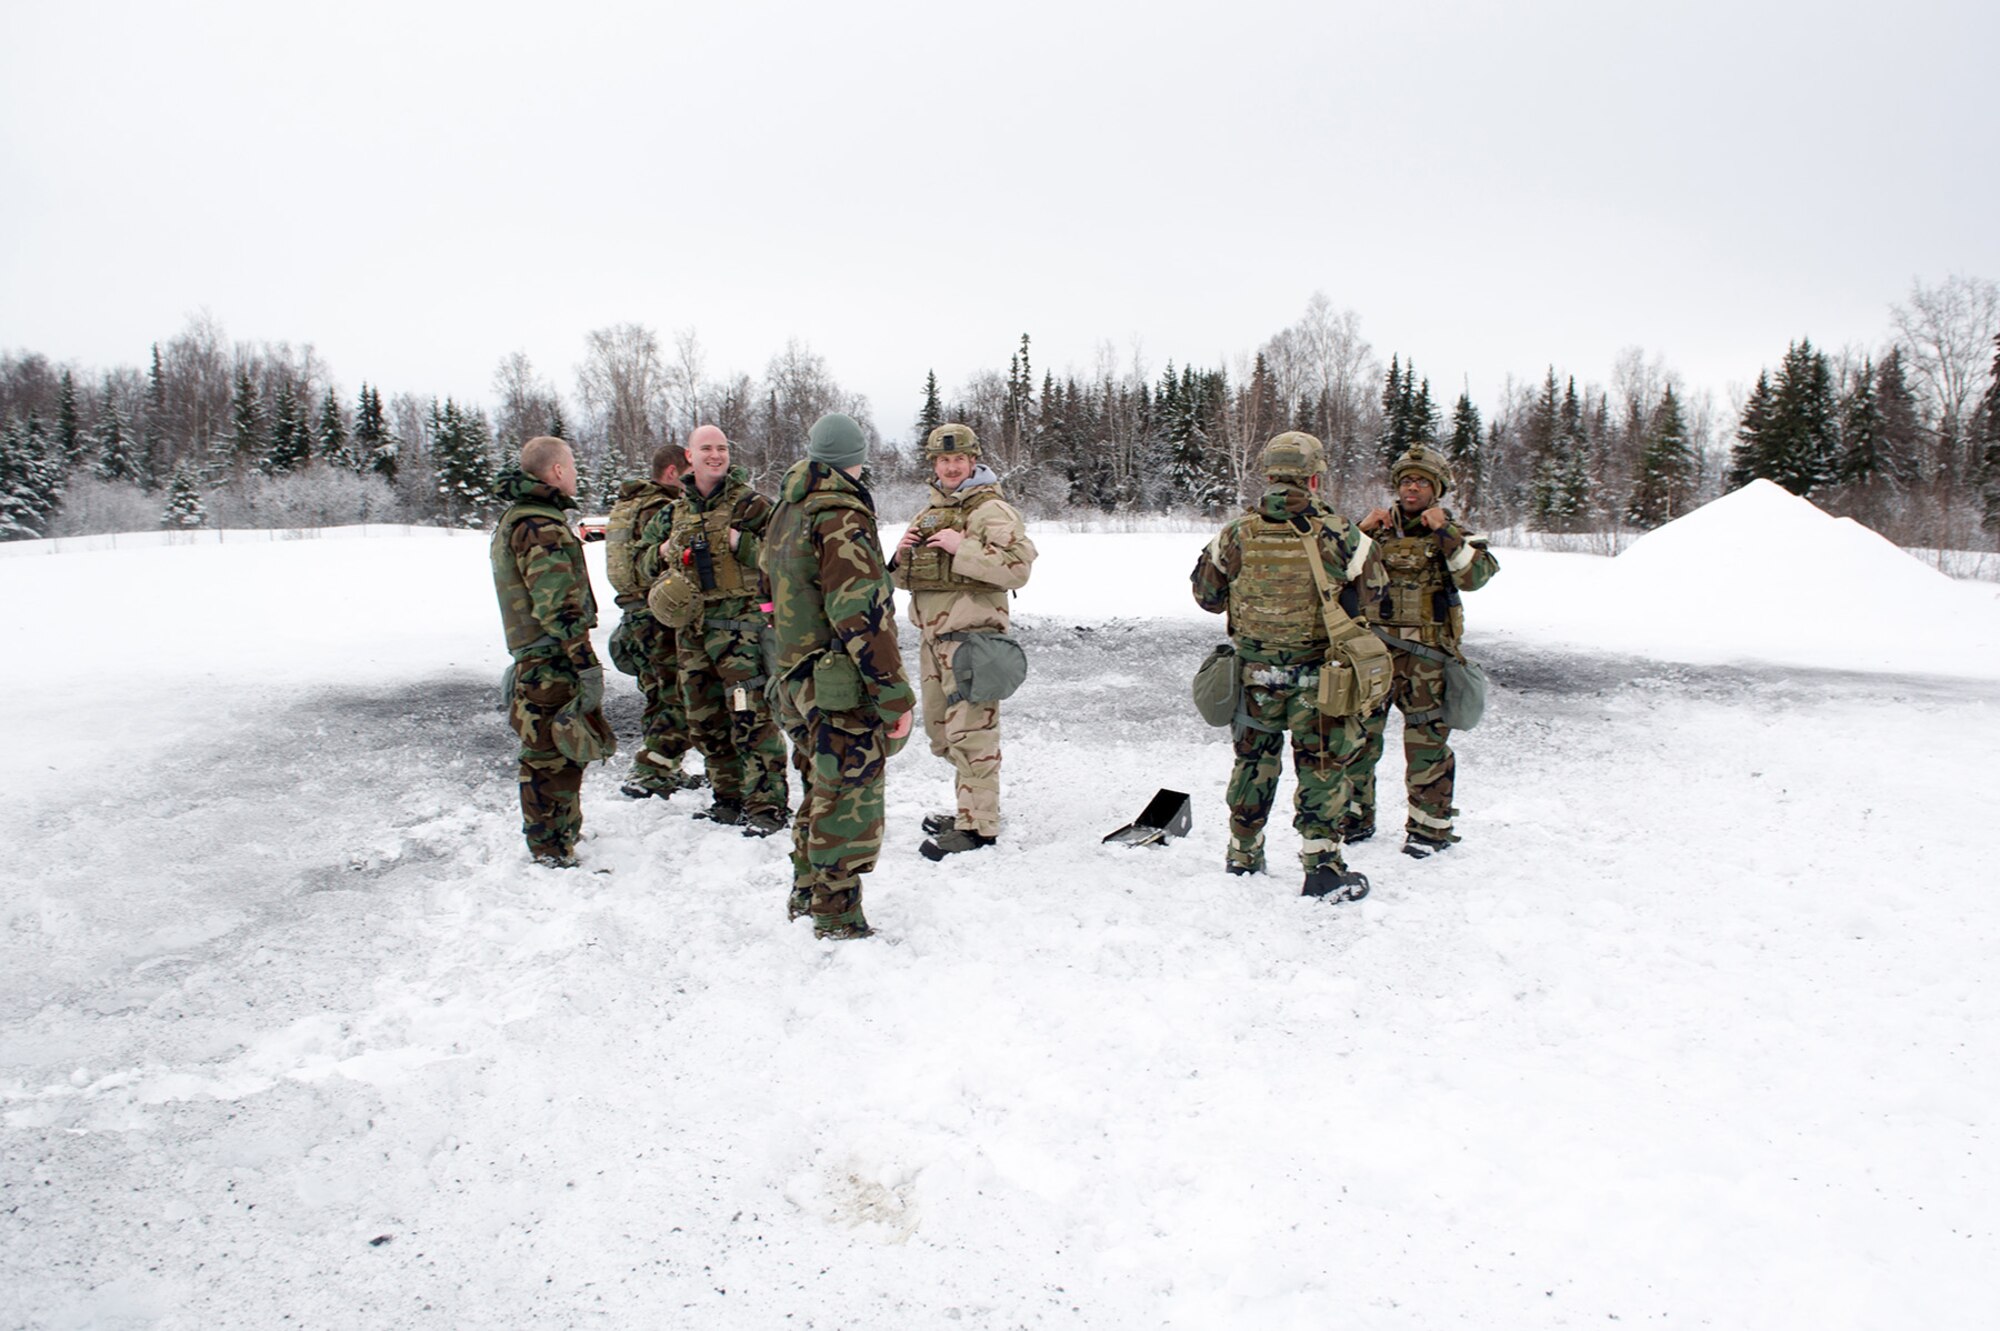 Airmen assigned to the 673d Civil Engineer Squadron, Explosives Ordinance Disposal Flight, stand near the blast area after a live-fire demolitions exercise in Mission Oriented Protective Posture 4 on Joint Base Elmendorf-Richardson, Alaska, Feb.14, 2018.  The Airmen were conducting EOD training in a simulated chemical weapons contaminated environment.